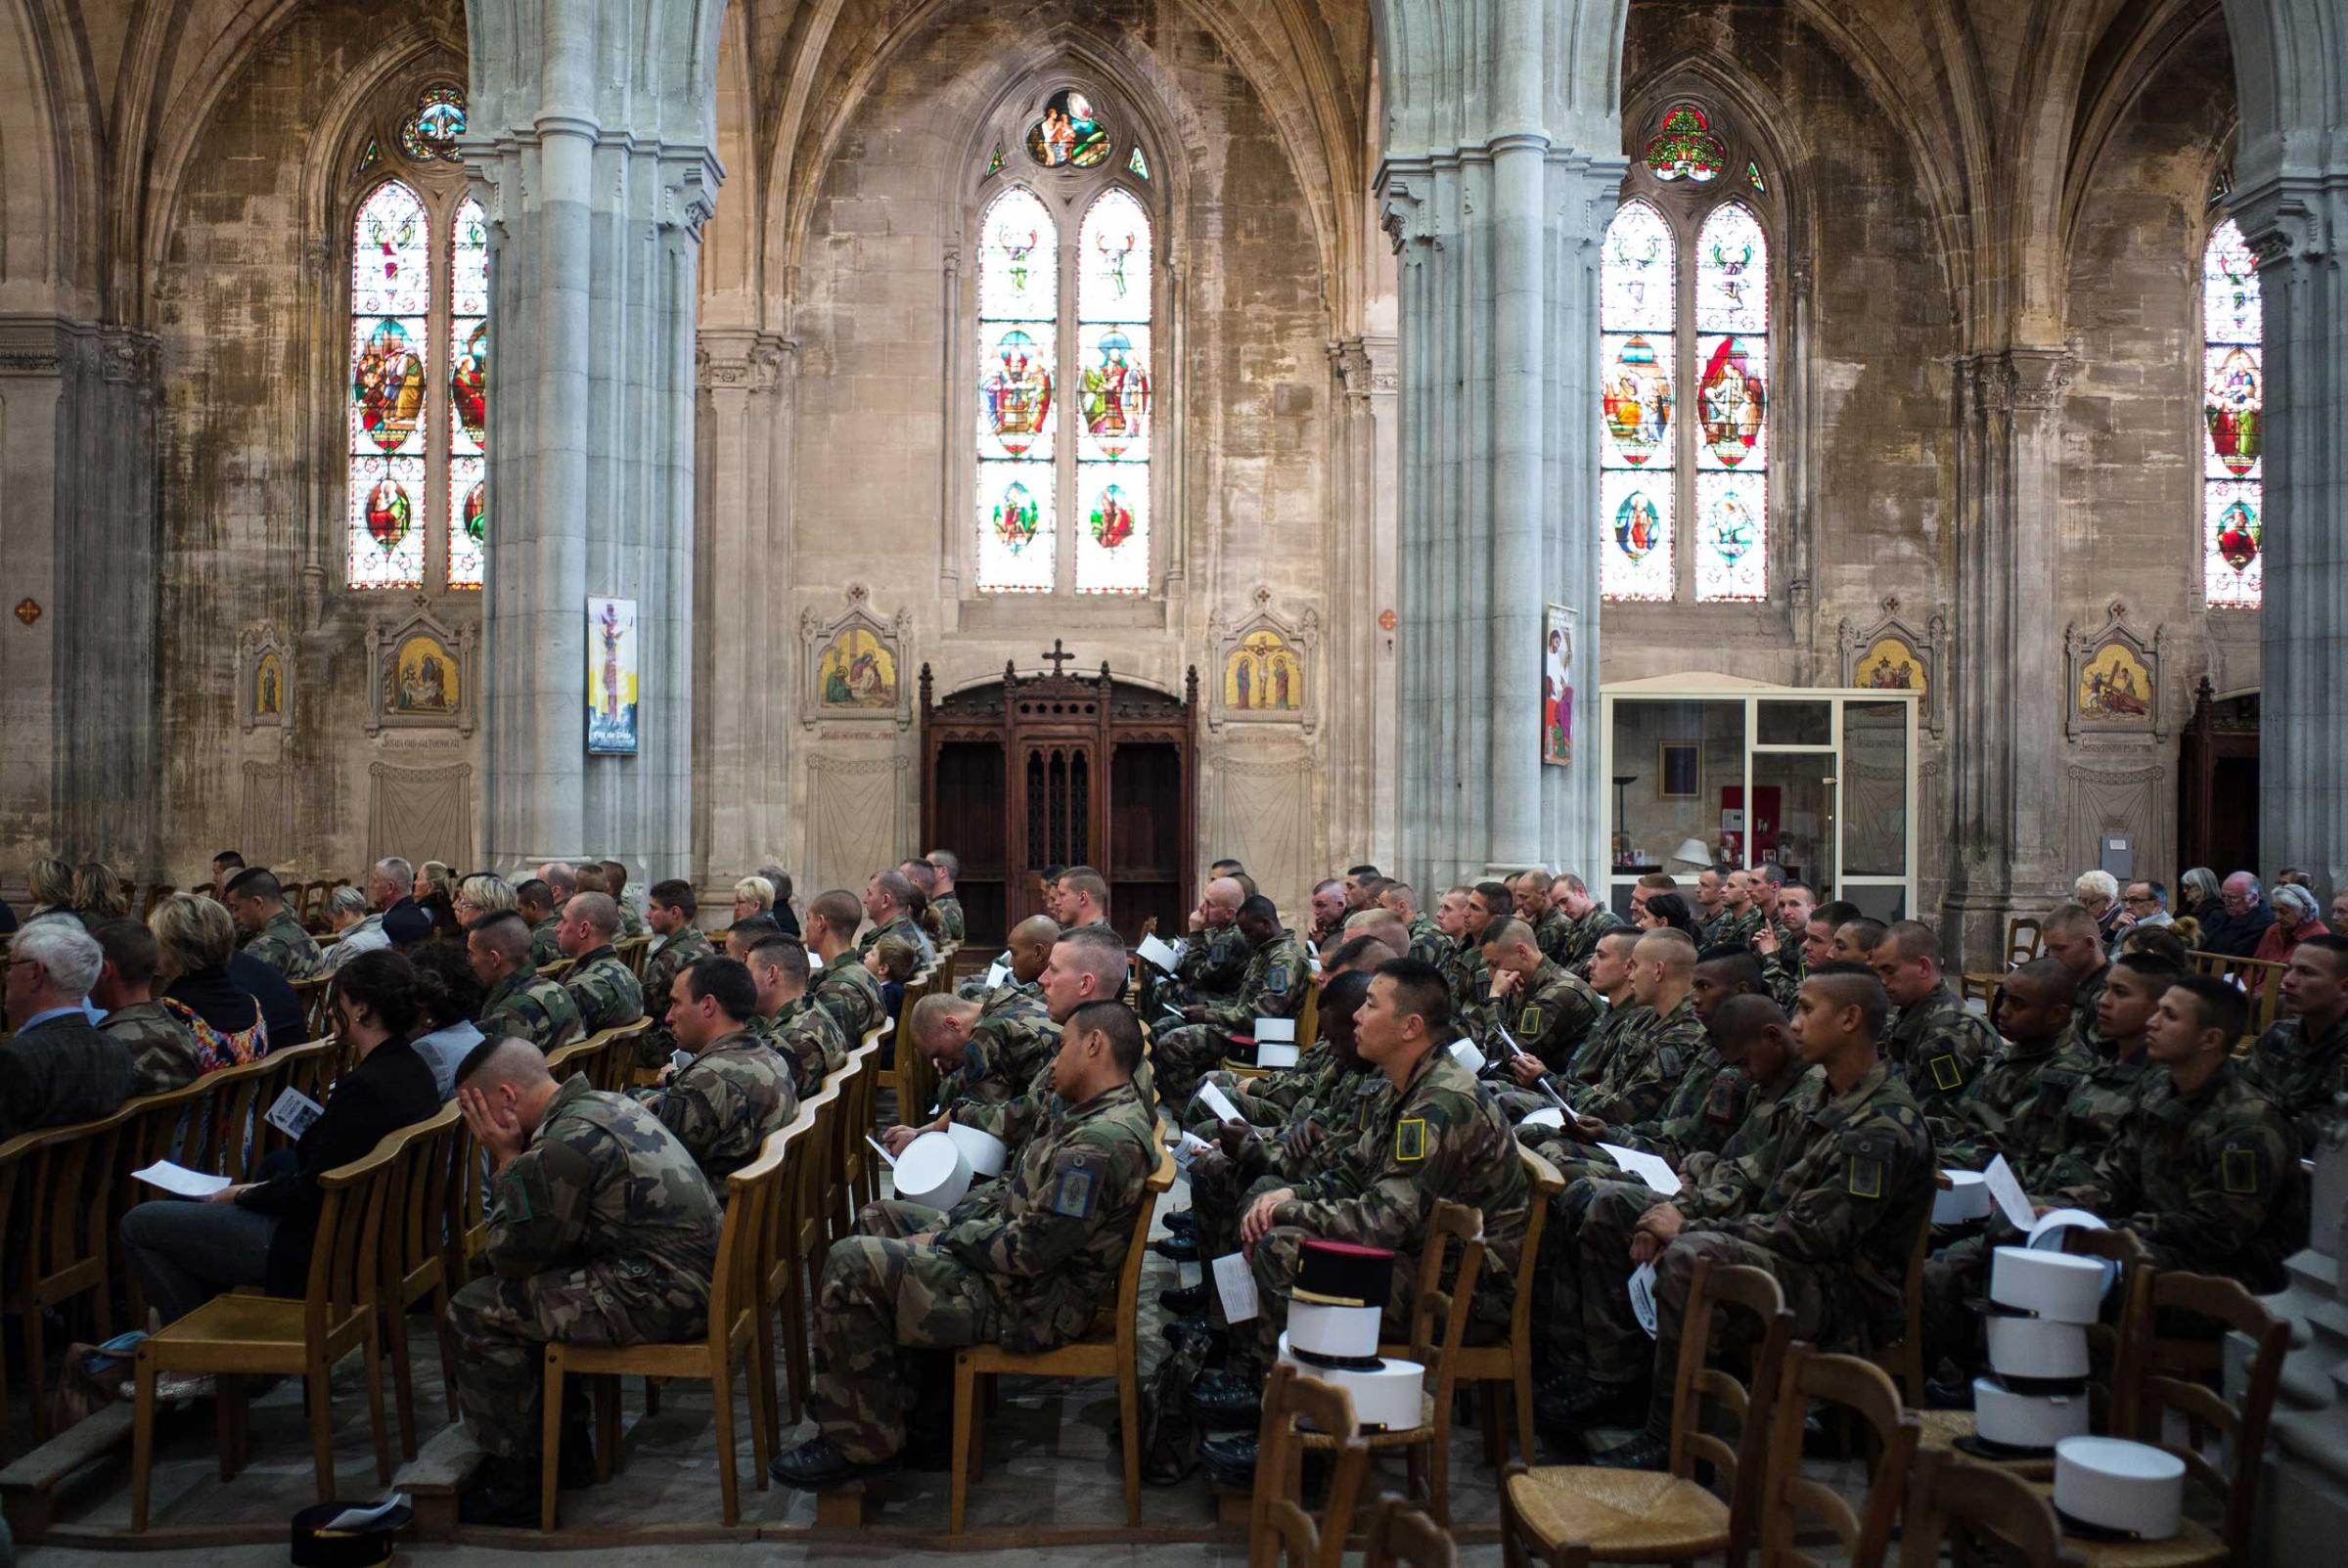 On April 29 and 30 - called Camerone Day, France celebrates its Foreign Legion. Legionaries attend a ceremony at the Christian Catholic Church of Sainte Baudile. Nimes, France. April 29, 2015.